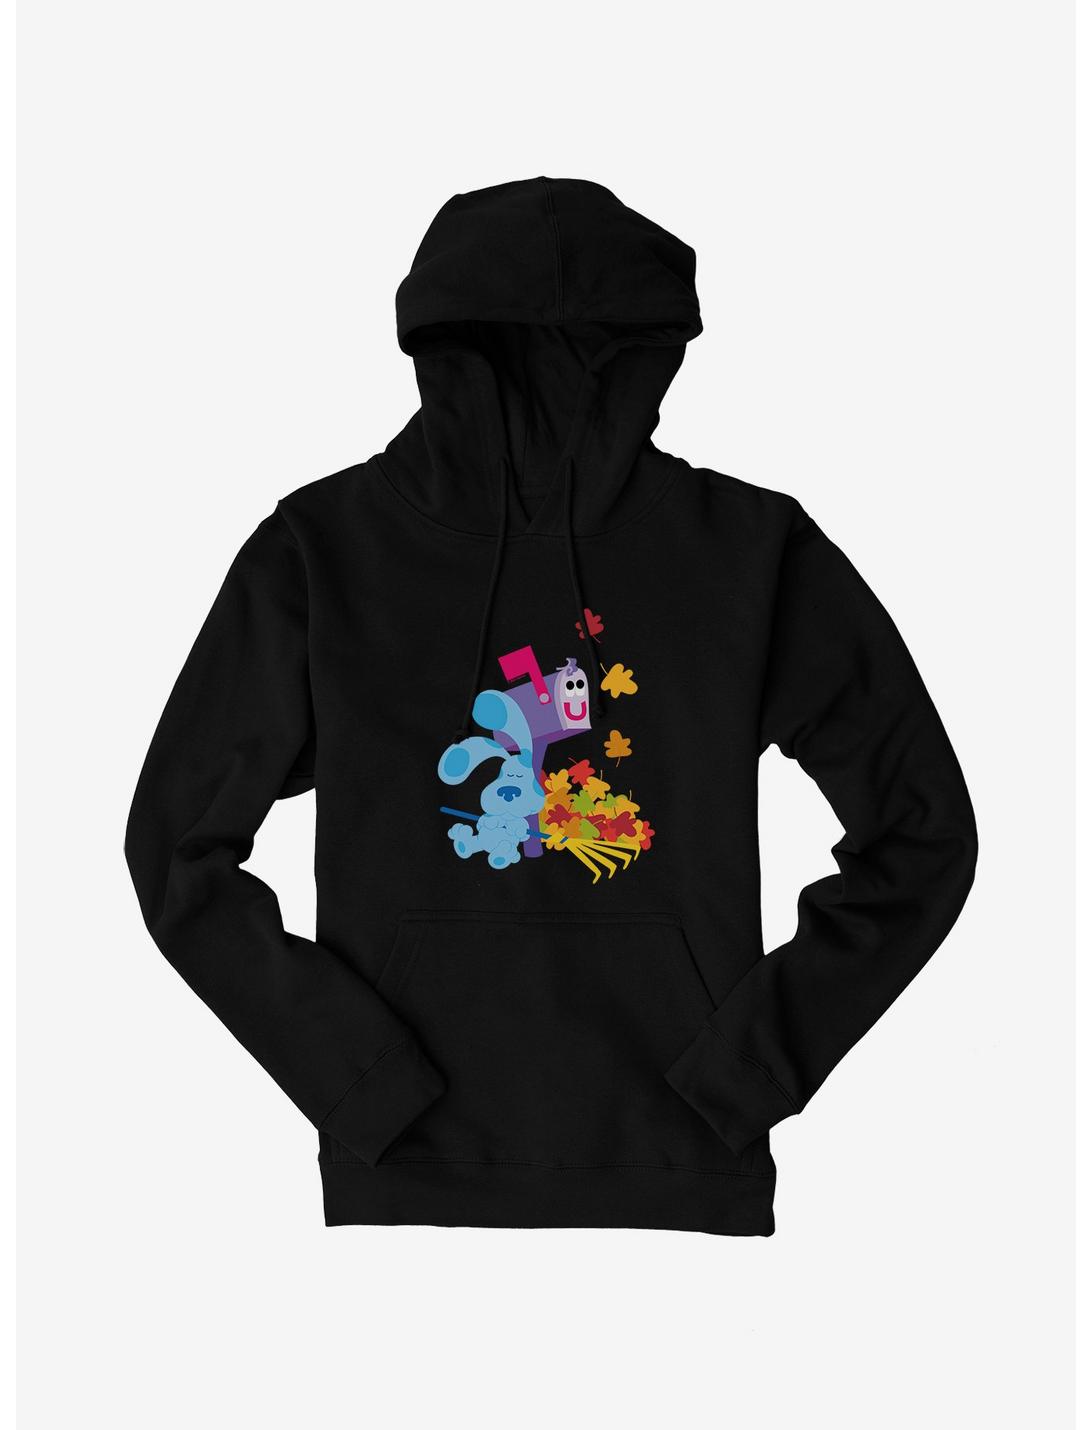 Blue's Clues Mailbox And Blue Autumn Leaves Hoodie, BLACK, hi-res